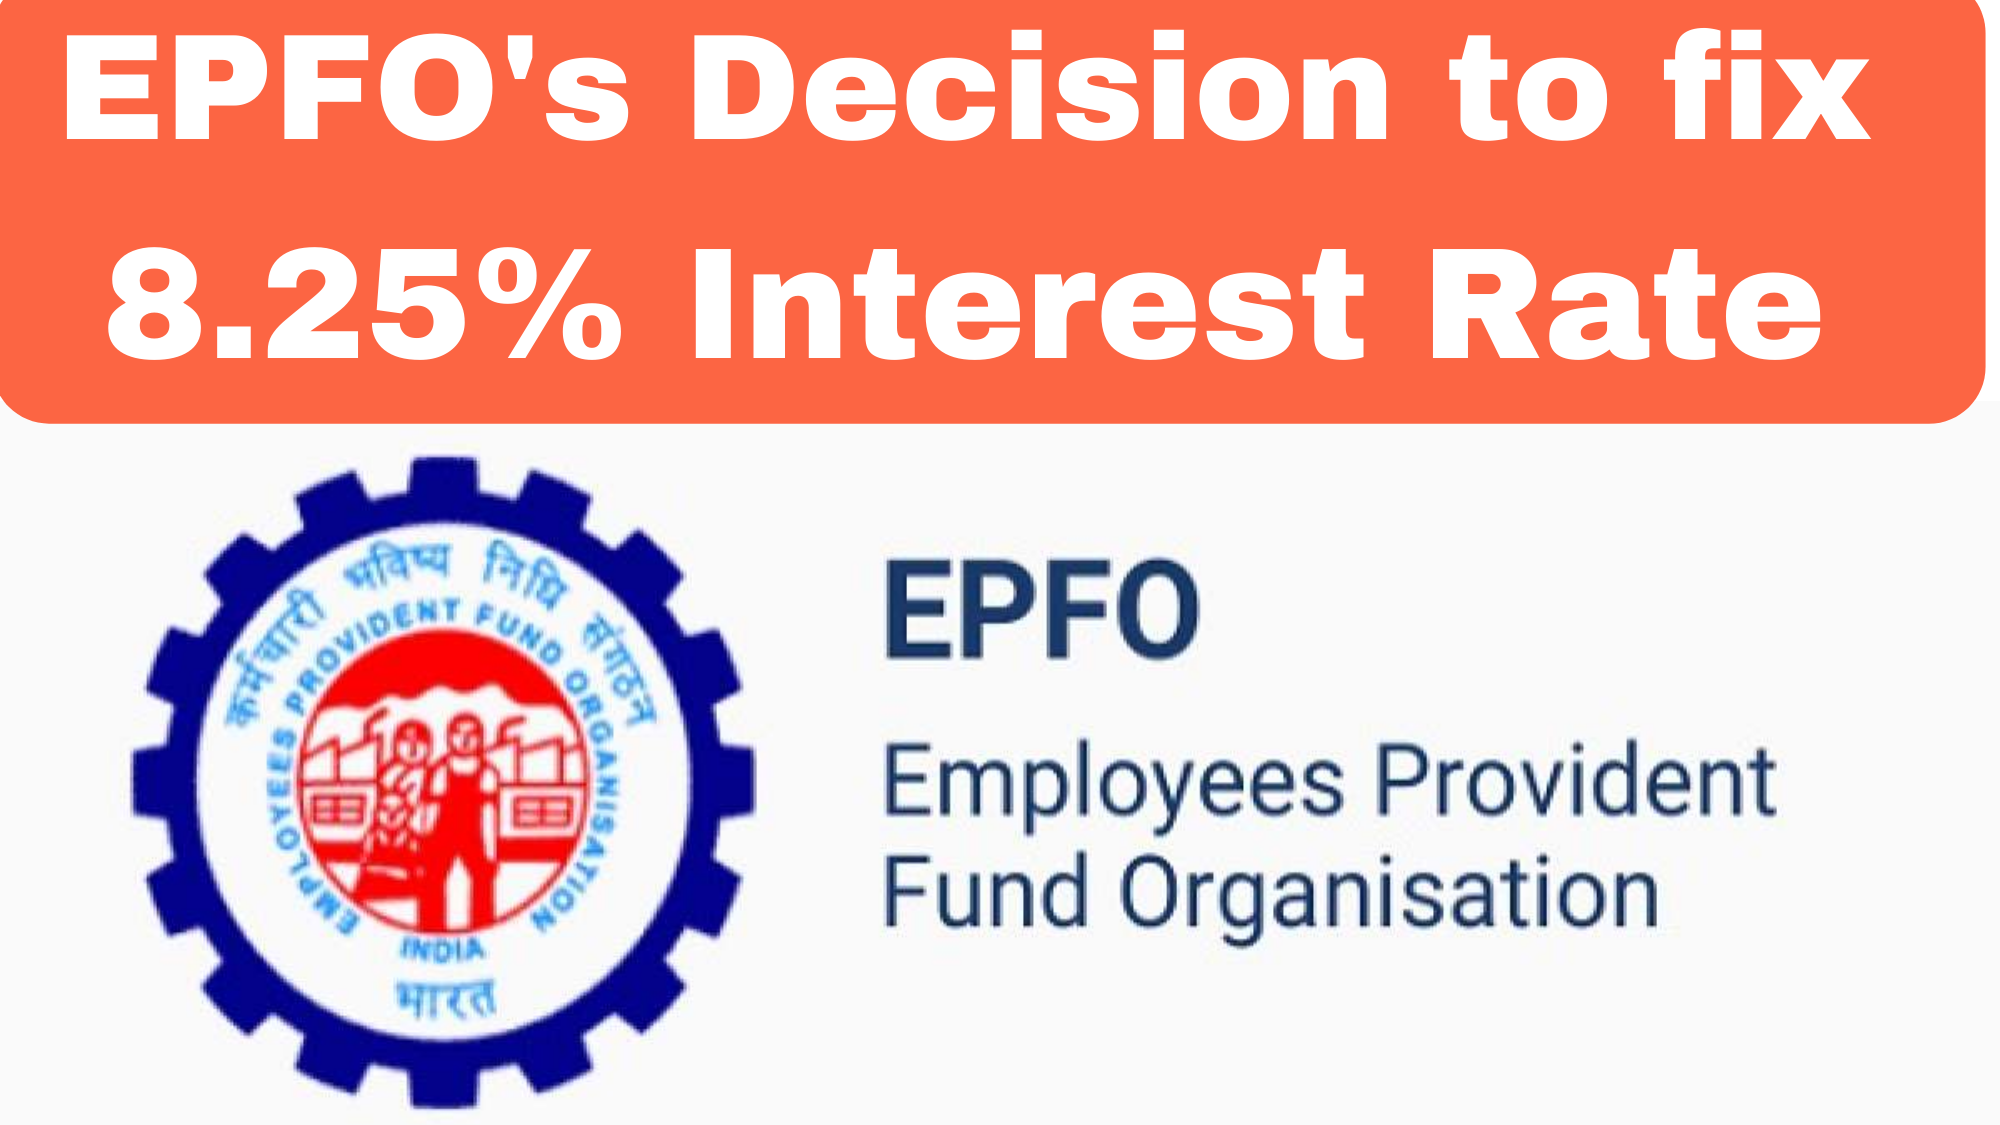 EPFO's Decision To Fix 8.25% Interest Rate - What it means for employees?